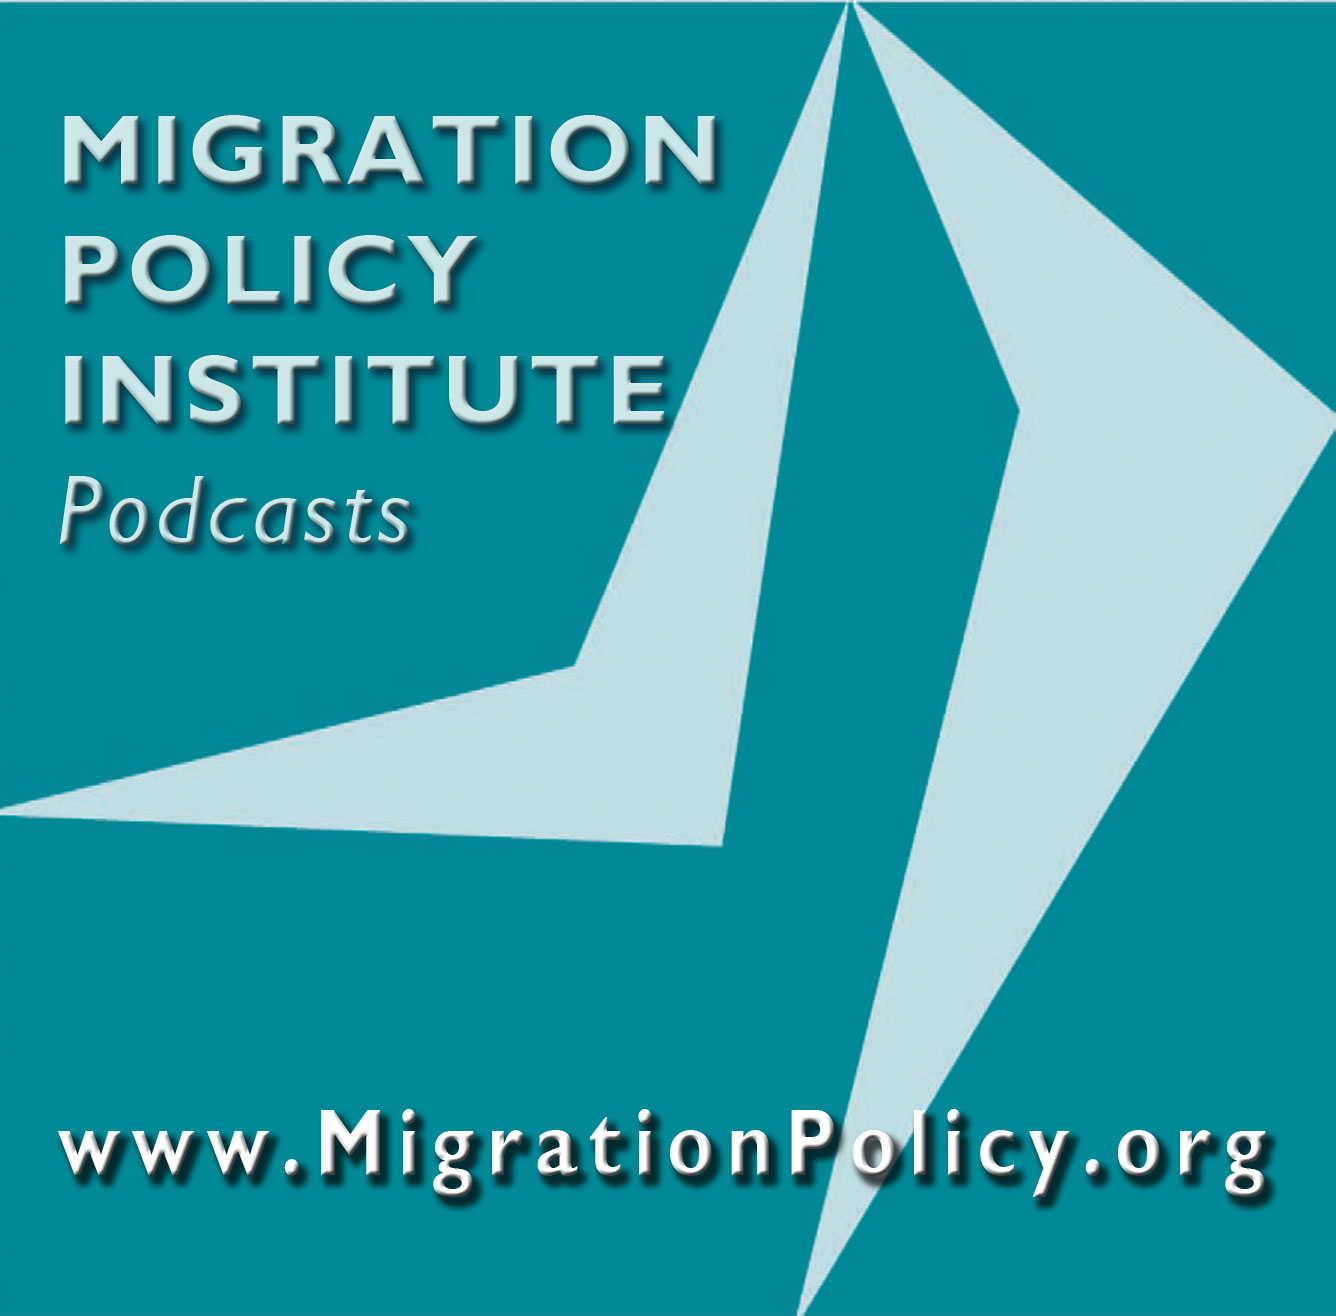 A New Reality at the Border: Assessing Current Conditions and Considerations for Future Policy